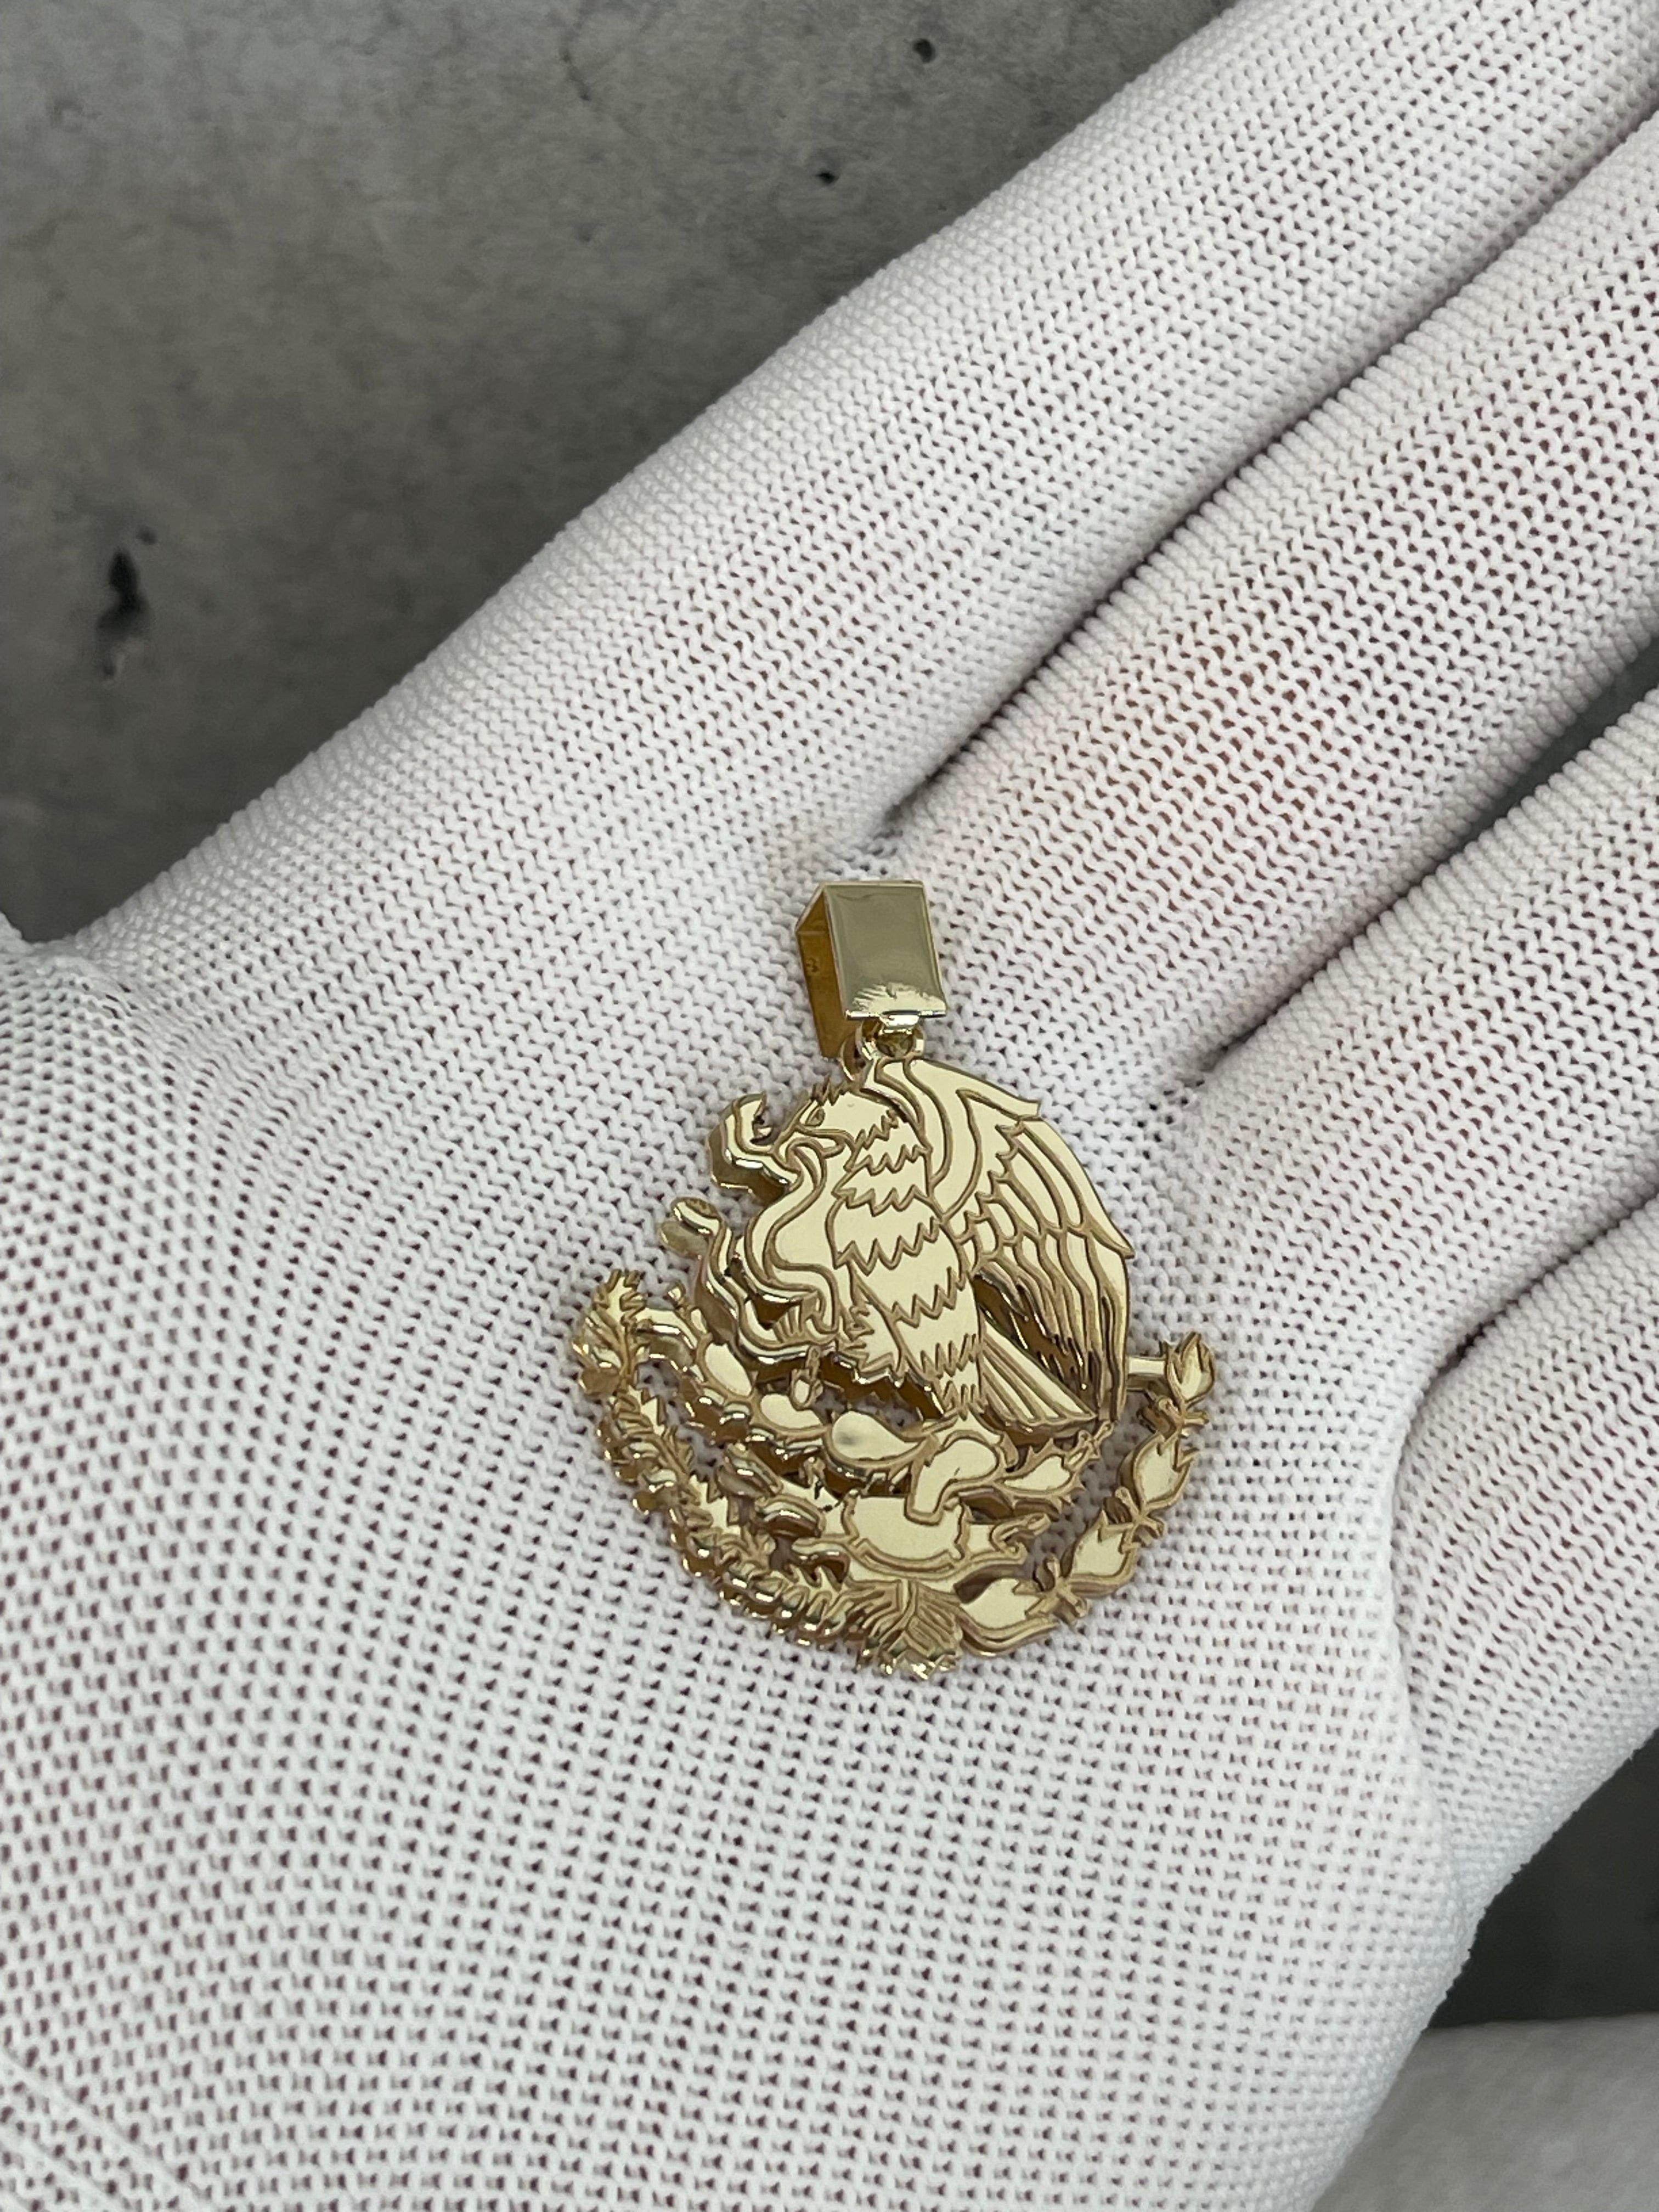 Mexican Coat of Arms 10k Gold Pendant